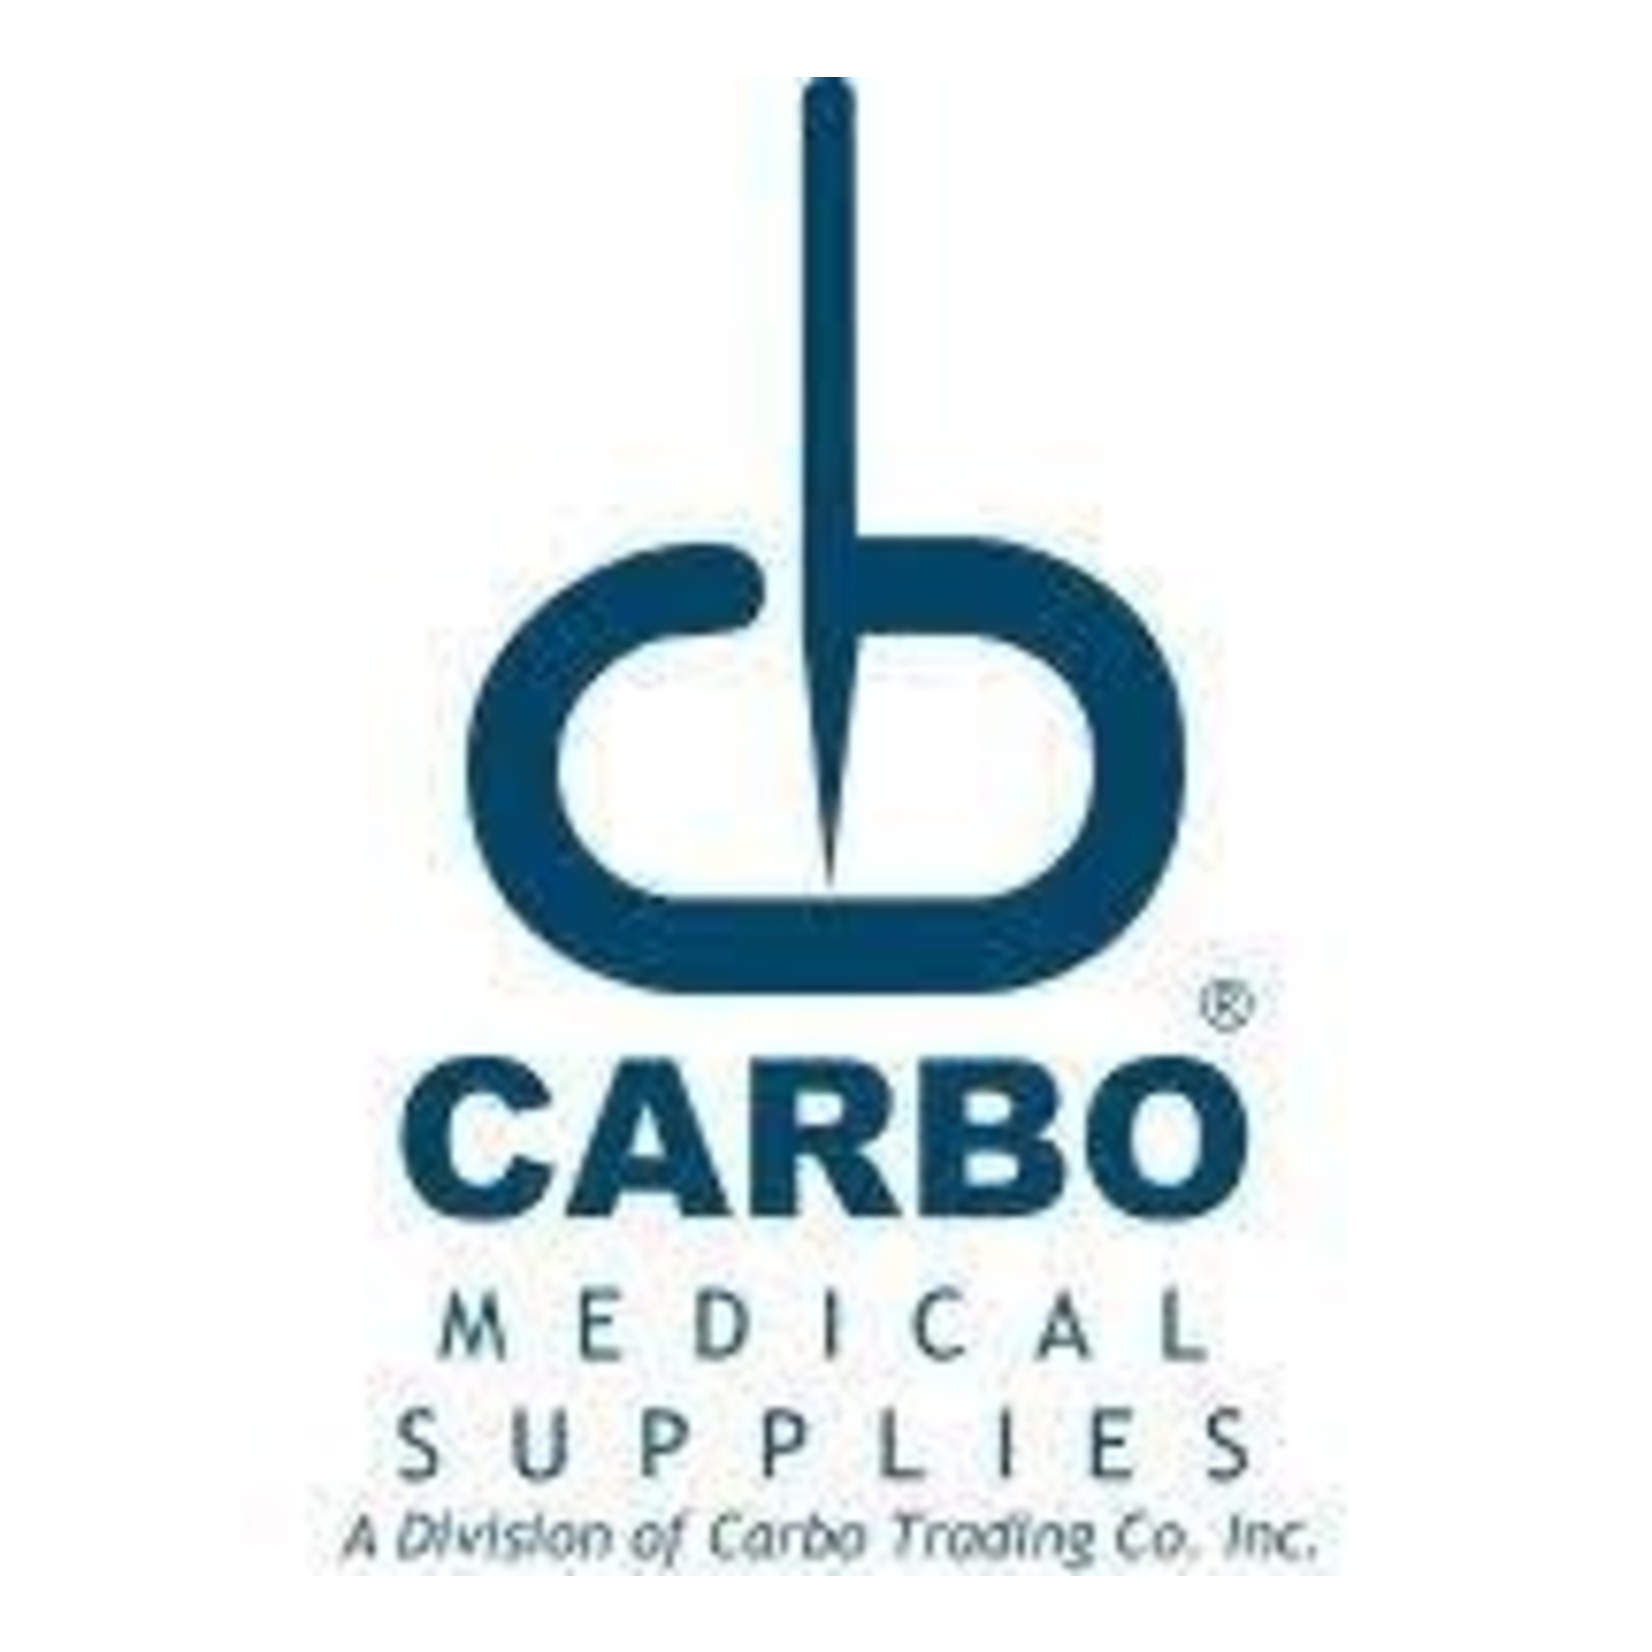 CARBO CARBO ACUPUNCTURE NEEDLE .30 x 1.0mm 100 PACK